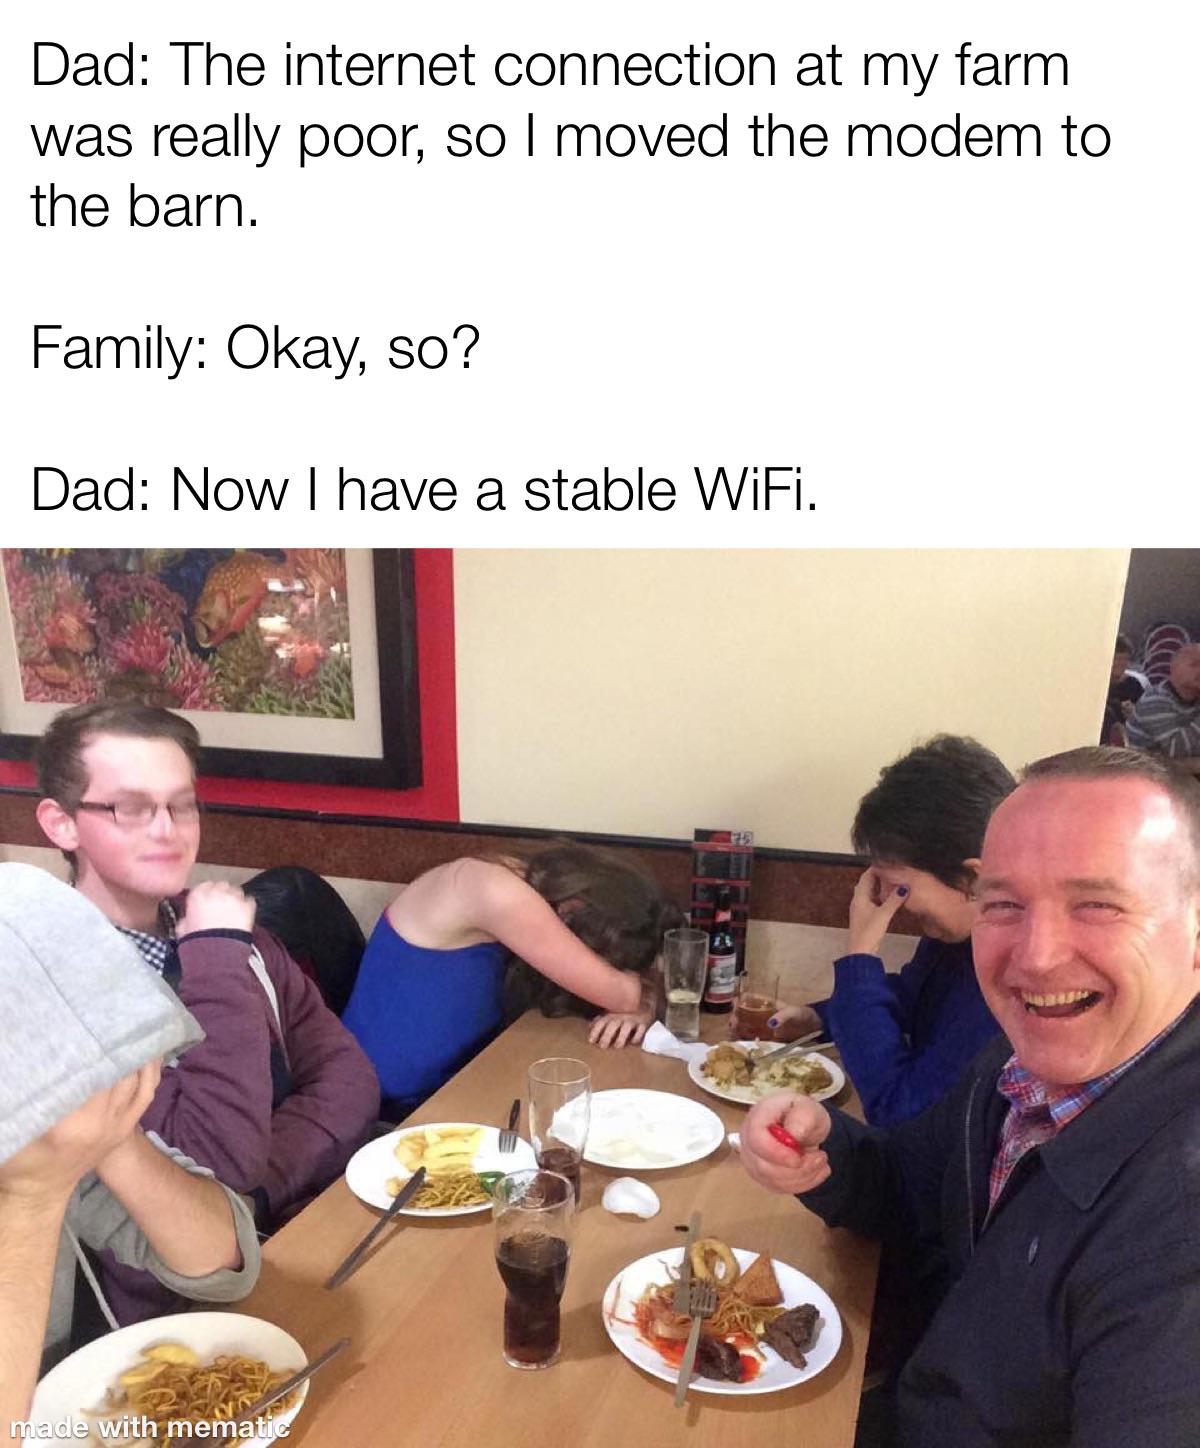 dank memes - erectile dysfunction memes - Dad The internet connection at my farm was really poor, so I moved the modem to the barn. Family Okay, so? Dad Now I have a stable WiFi. made with mematic